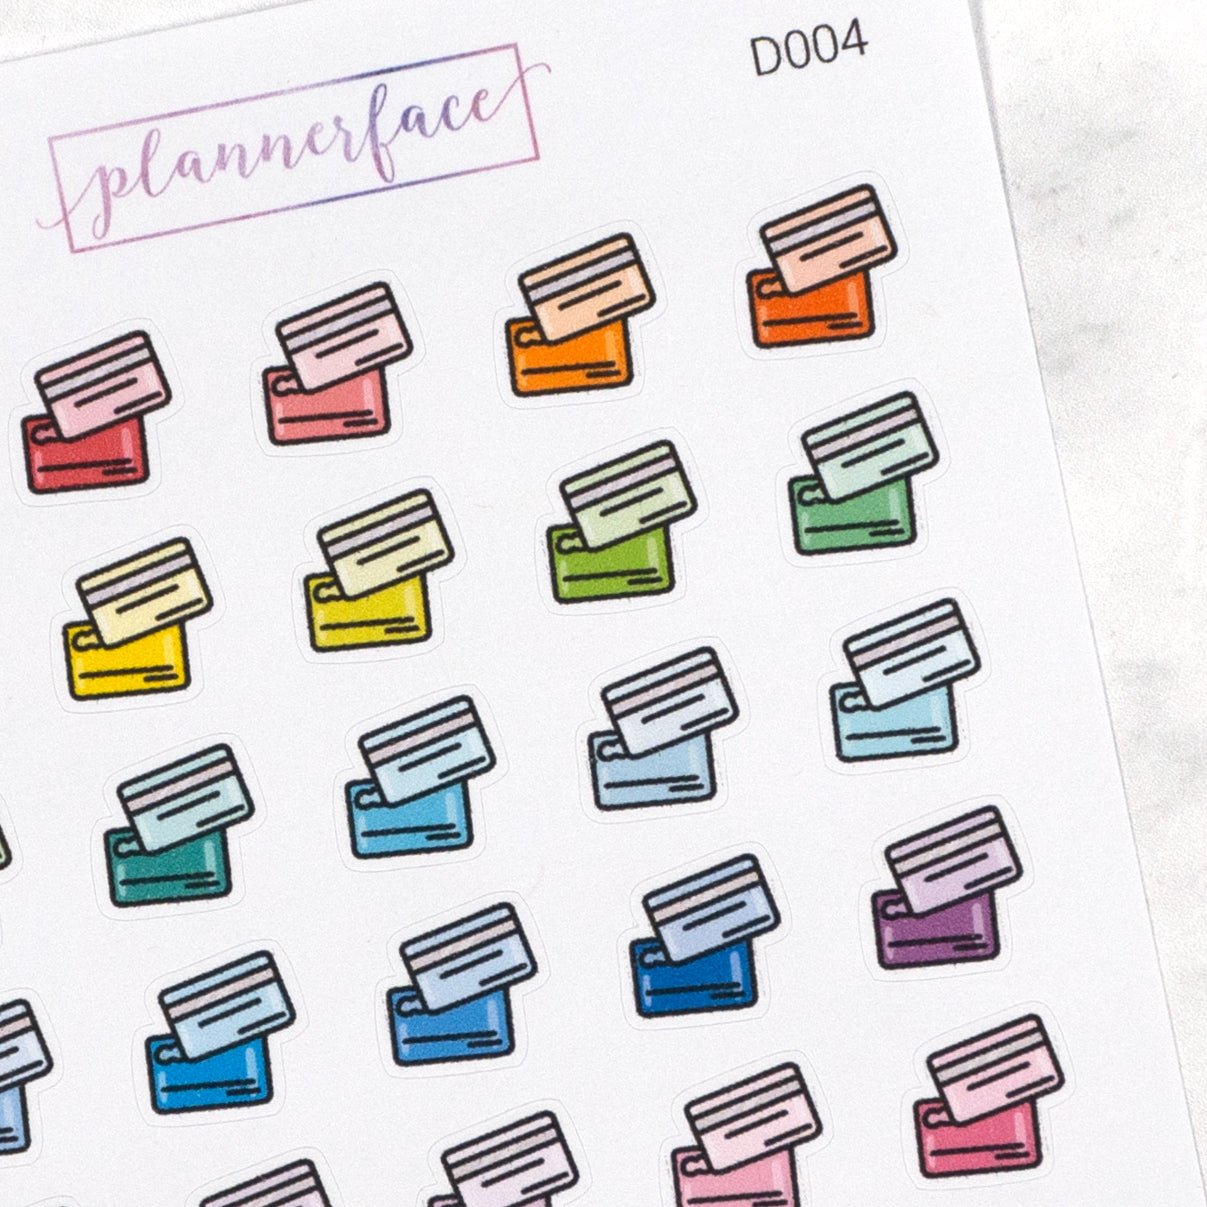 Credit Card Multicolour Doodles by Plannerface